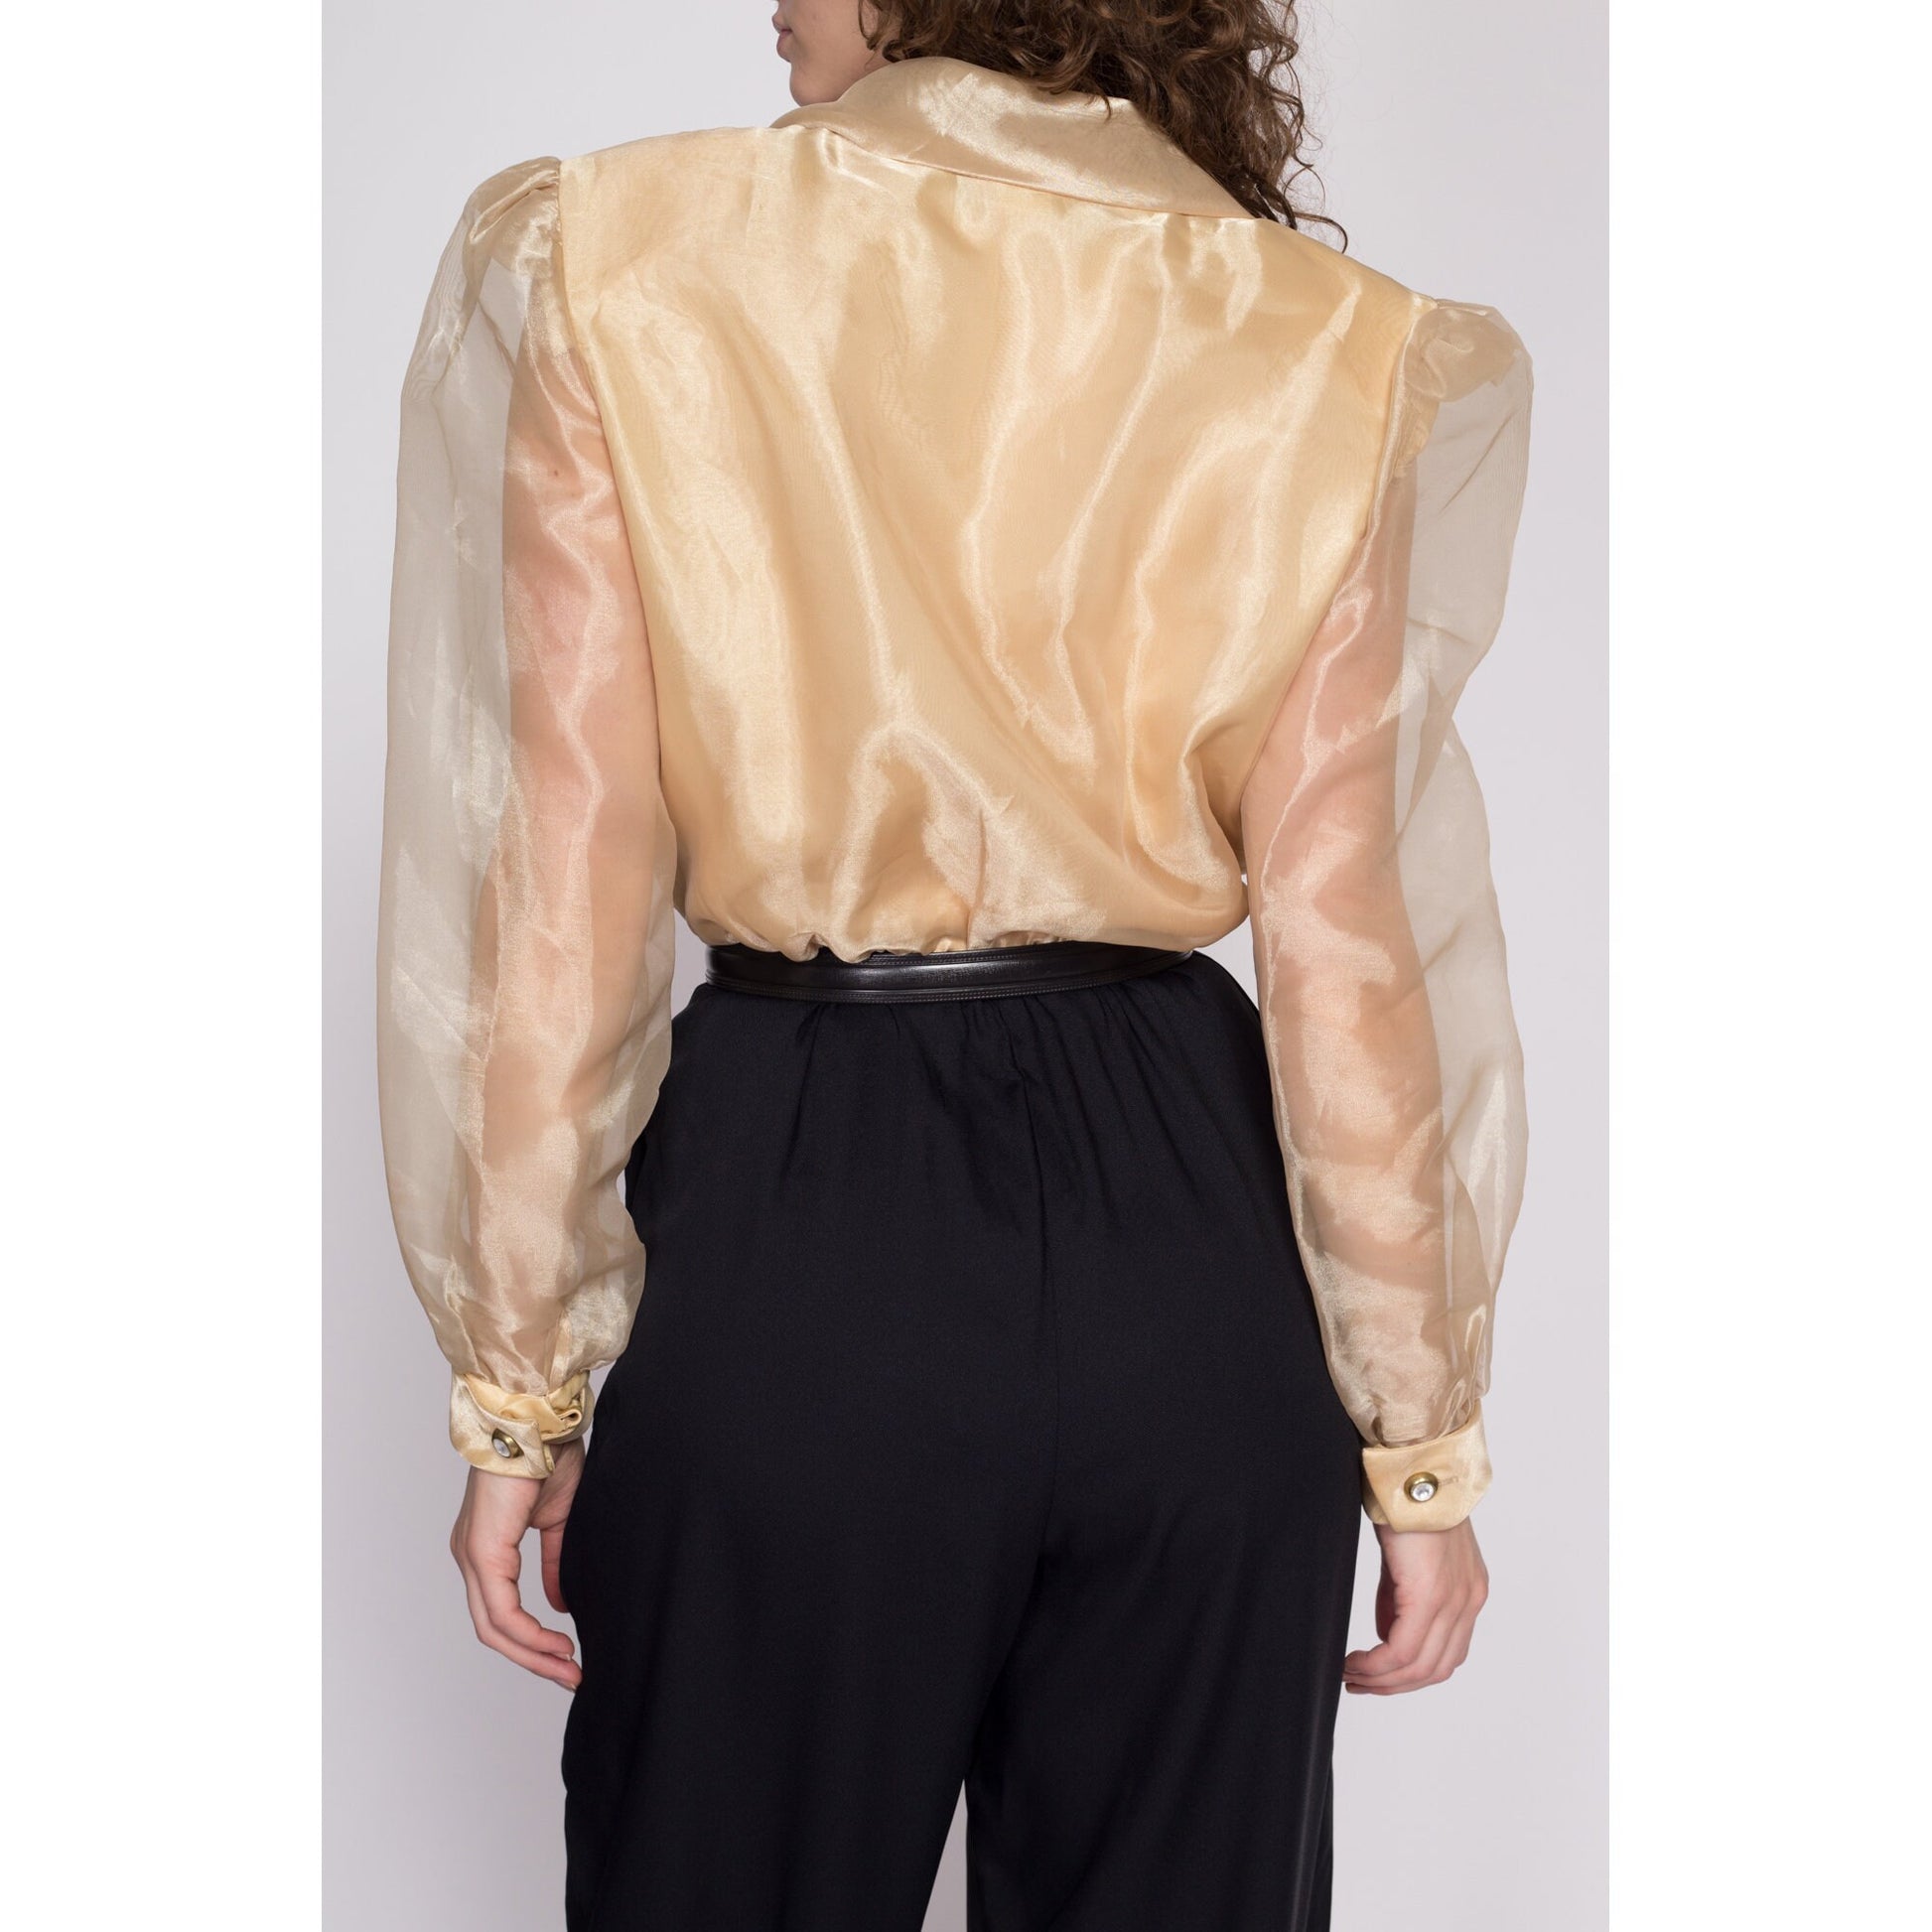 L| 80s Organza Two Tone Jumpsuit - Large | Vintage Gold Black Sheer Sleeve Collared Pantsuit